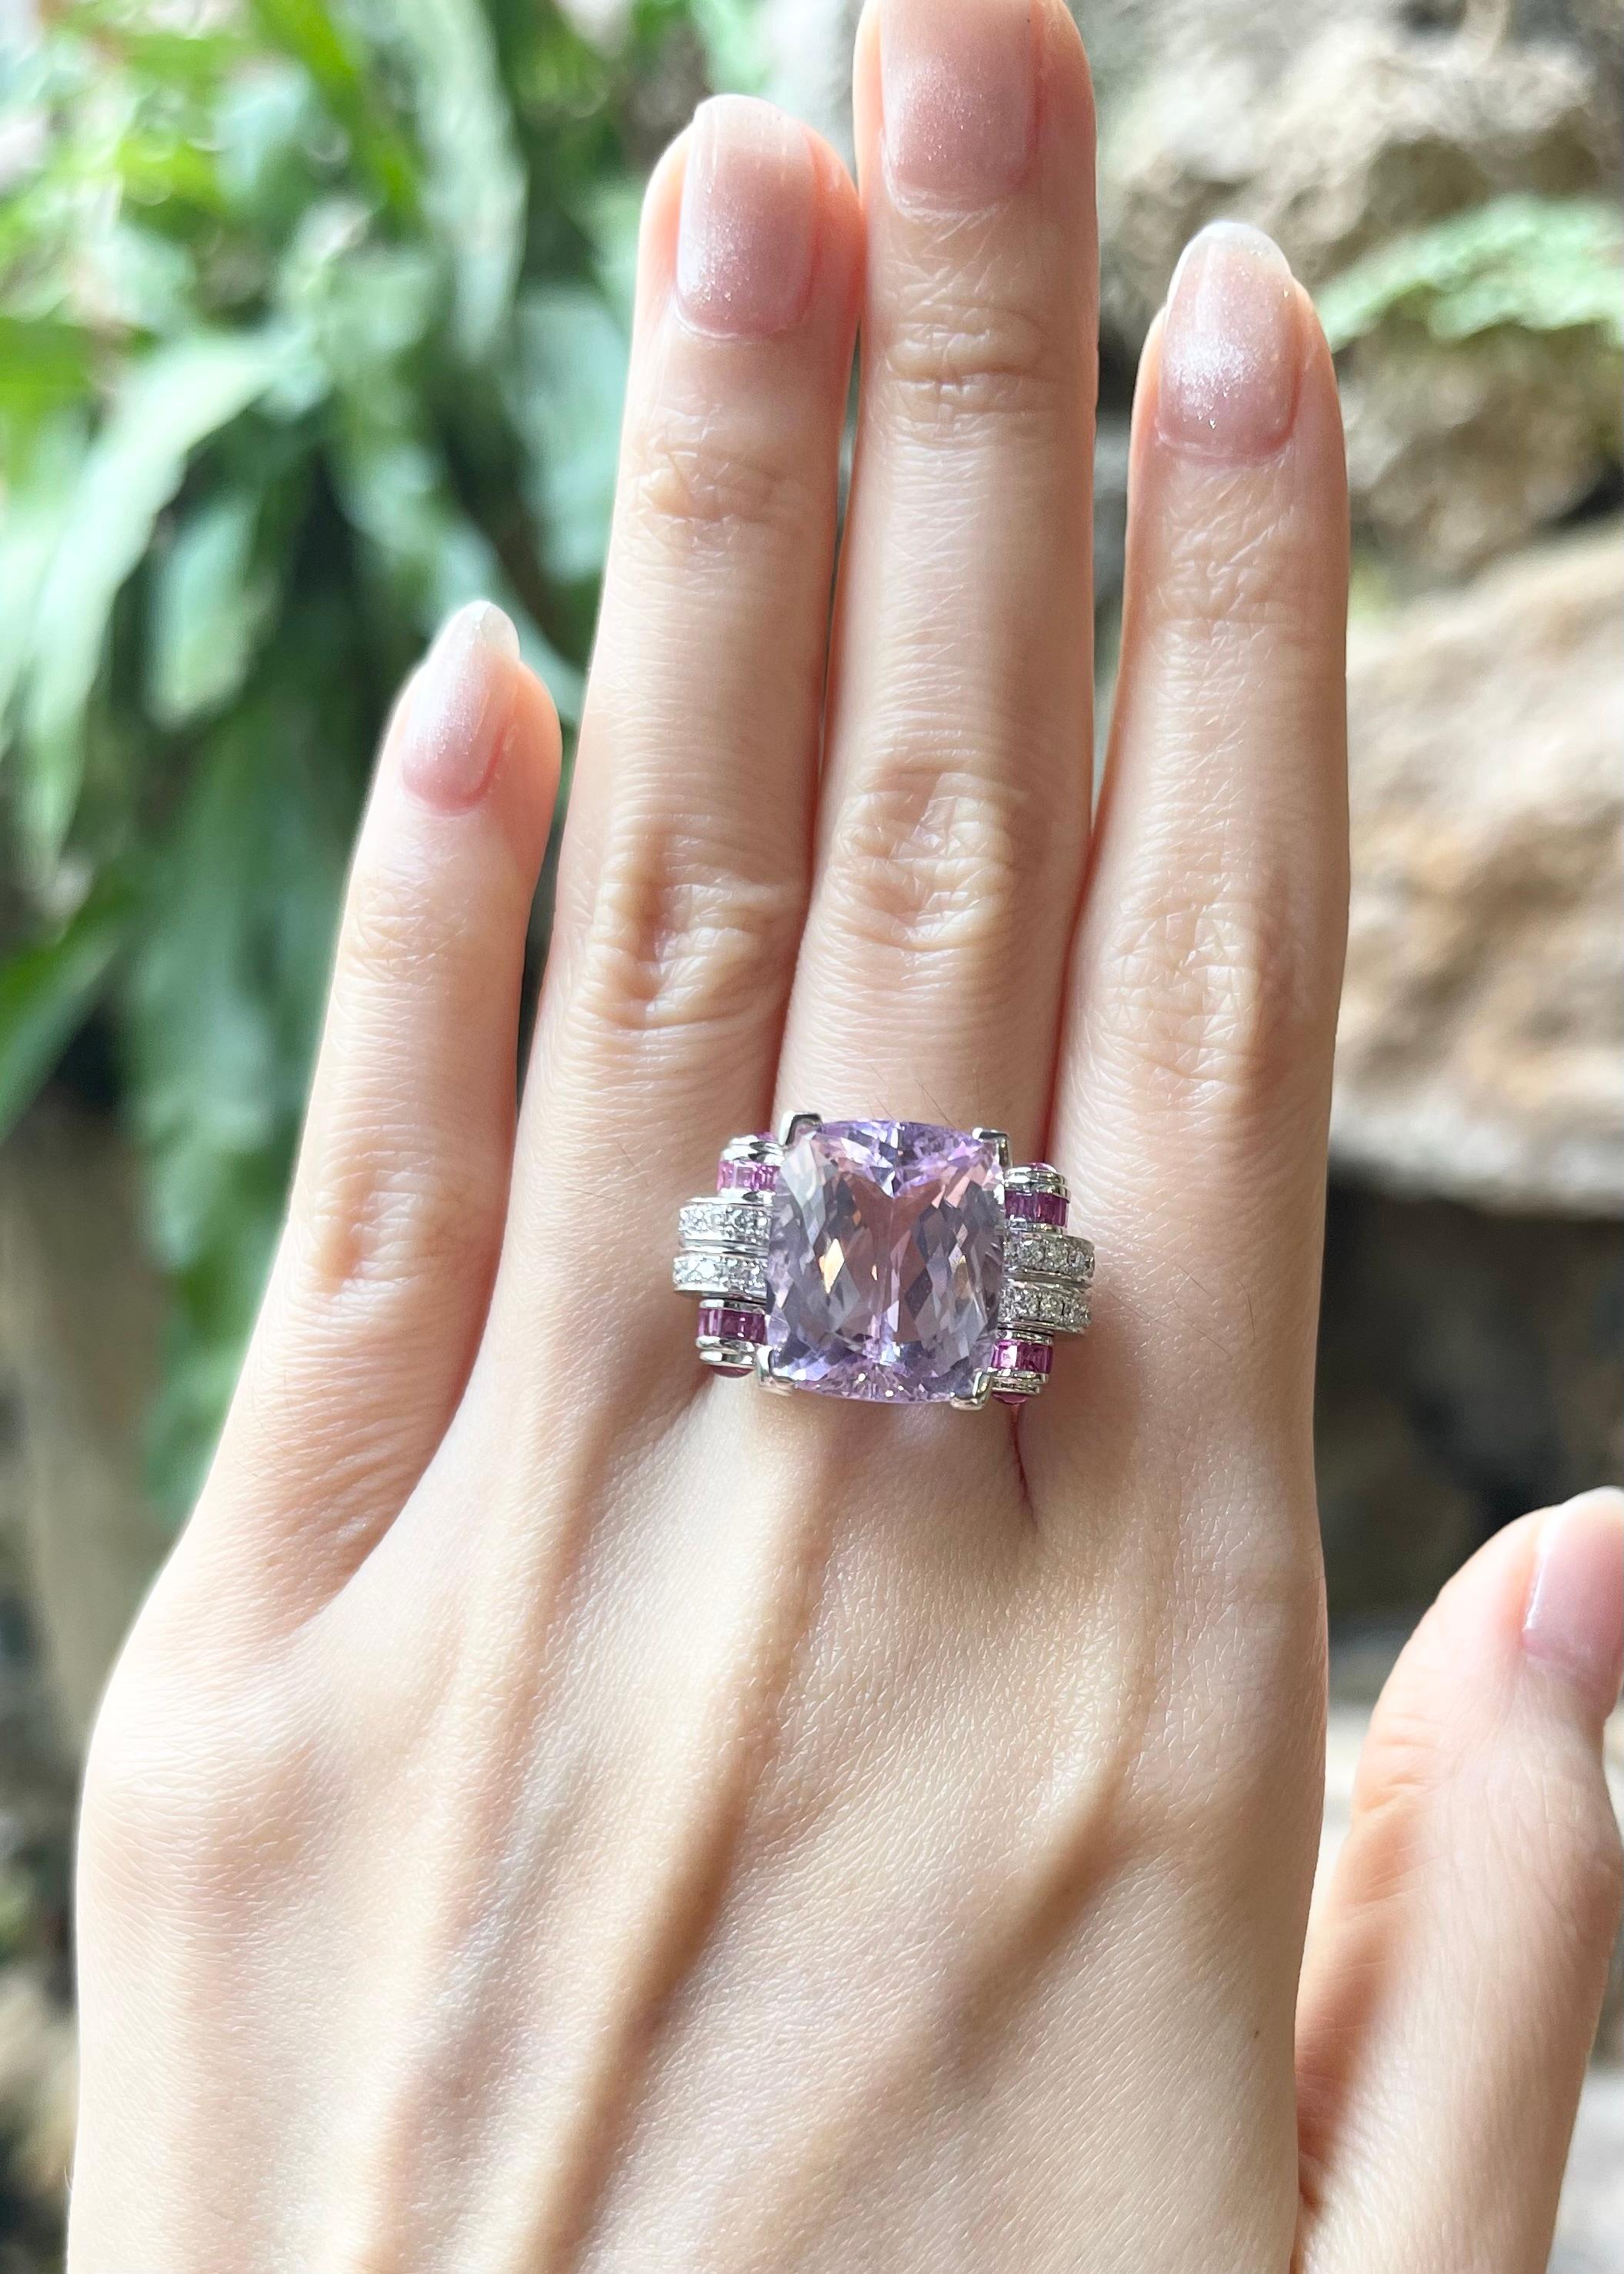 Kunzite 12.61 carats, Pink Sapphire 1.10 carats, Cabochon Pink Sapphire 0.60 carat and Diamond 0.33 carats Ring set in 18K White Gold Settings

Width:  2.3 cm 
Length: 1.5 cm
Ring Size: 53
Total Weight: 14.41 grams

